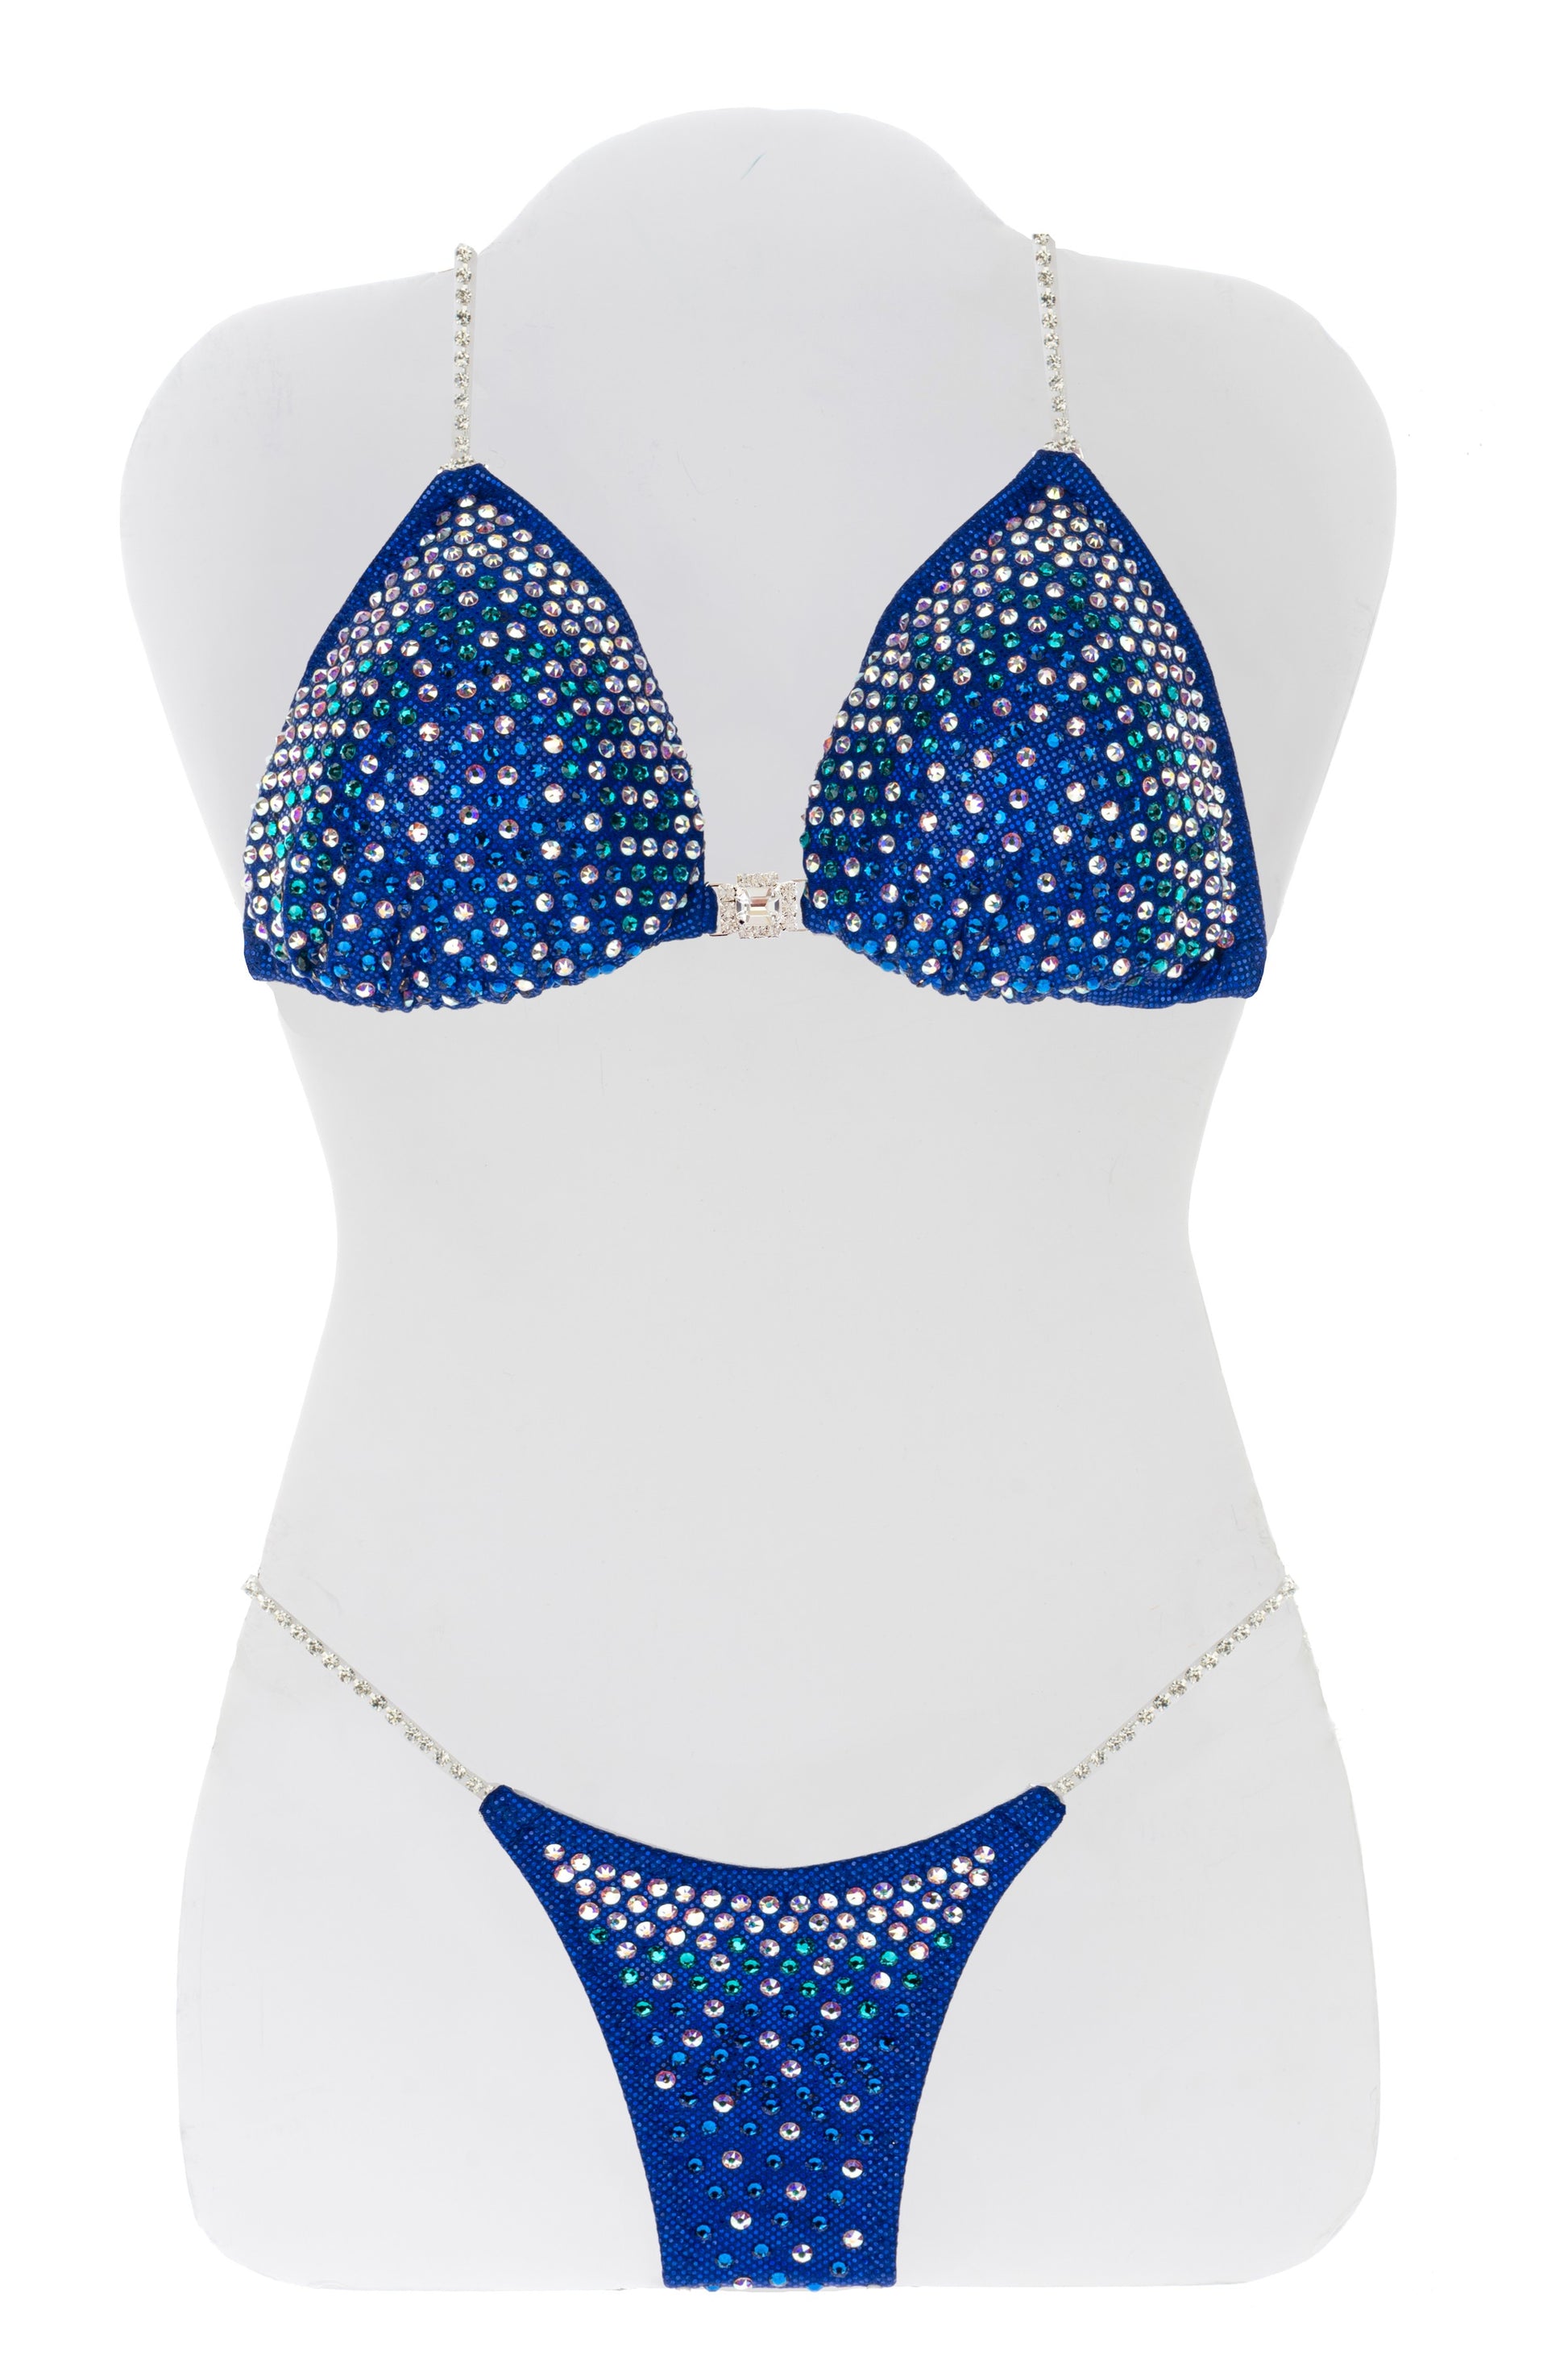 JW Couture Custom Bikini and Bikini Wellness Competition Suit. Heavily rhinestoned front, crystal clear fading from edges toward the center area, on blue fabric. Handmade in Canada.